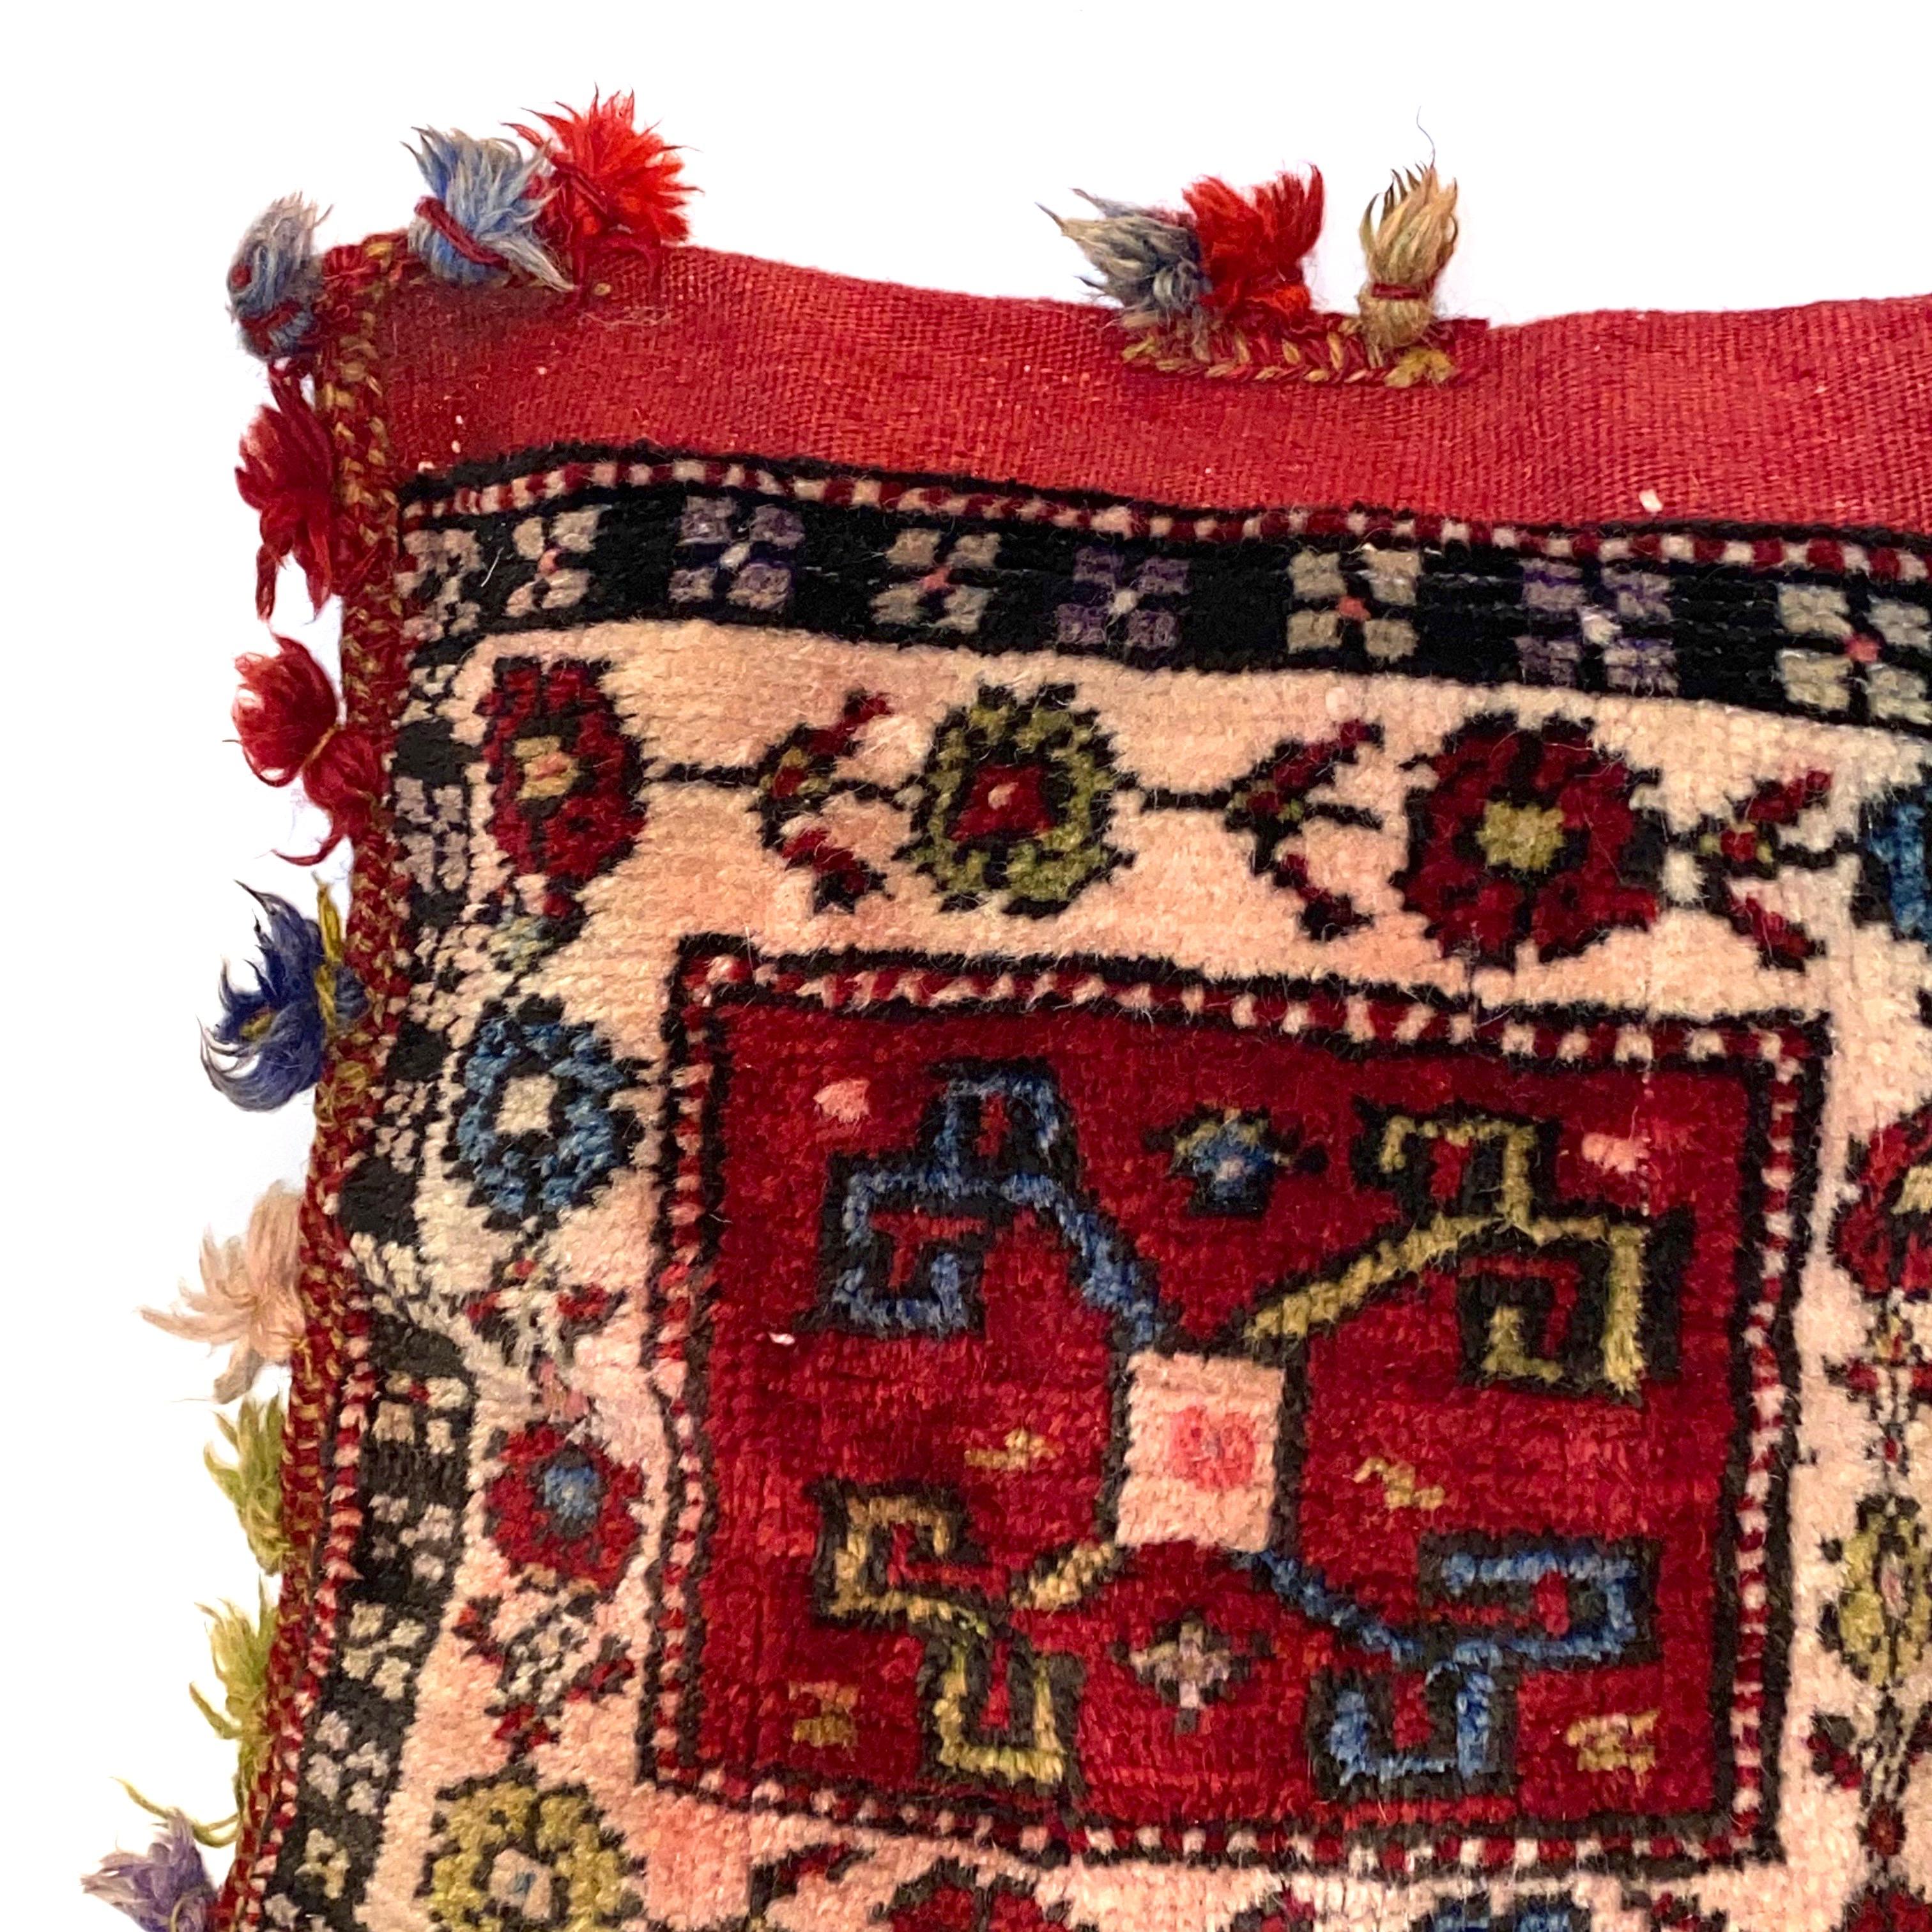 Hand-Knotted Arabian Turkish Oriental Salt Bag or Rug Embroidery Pillow For Sale